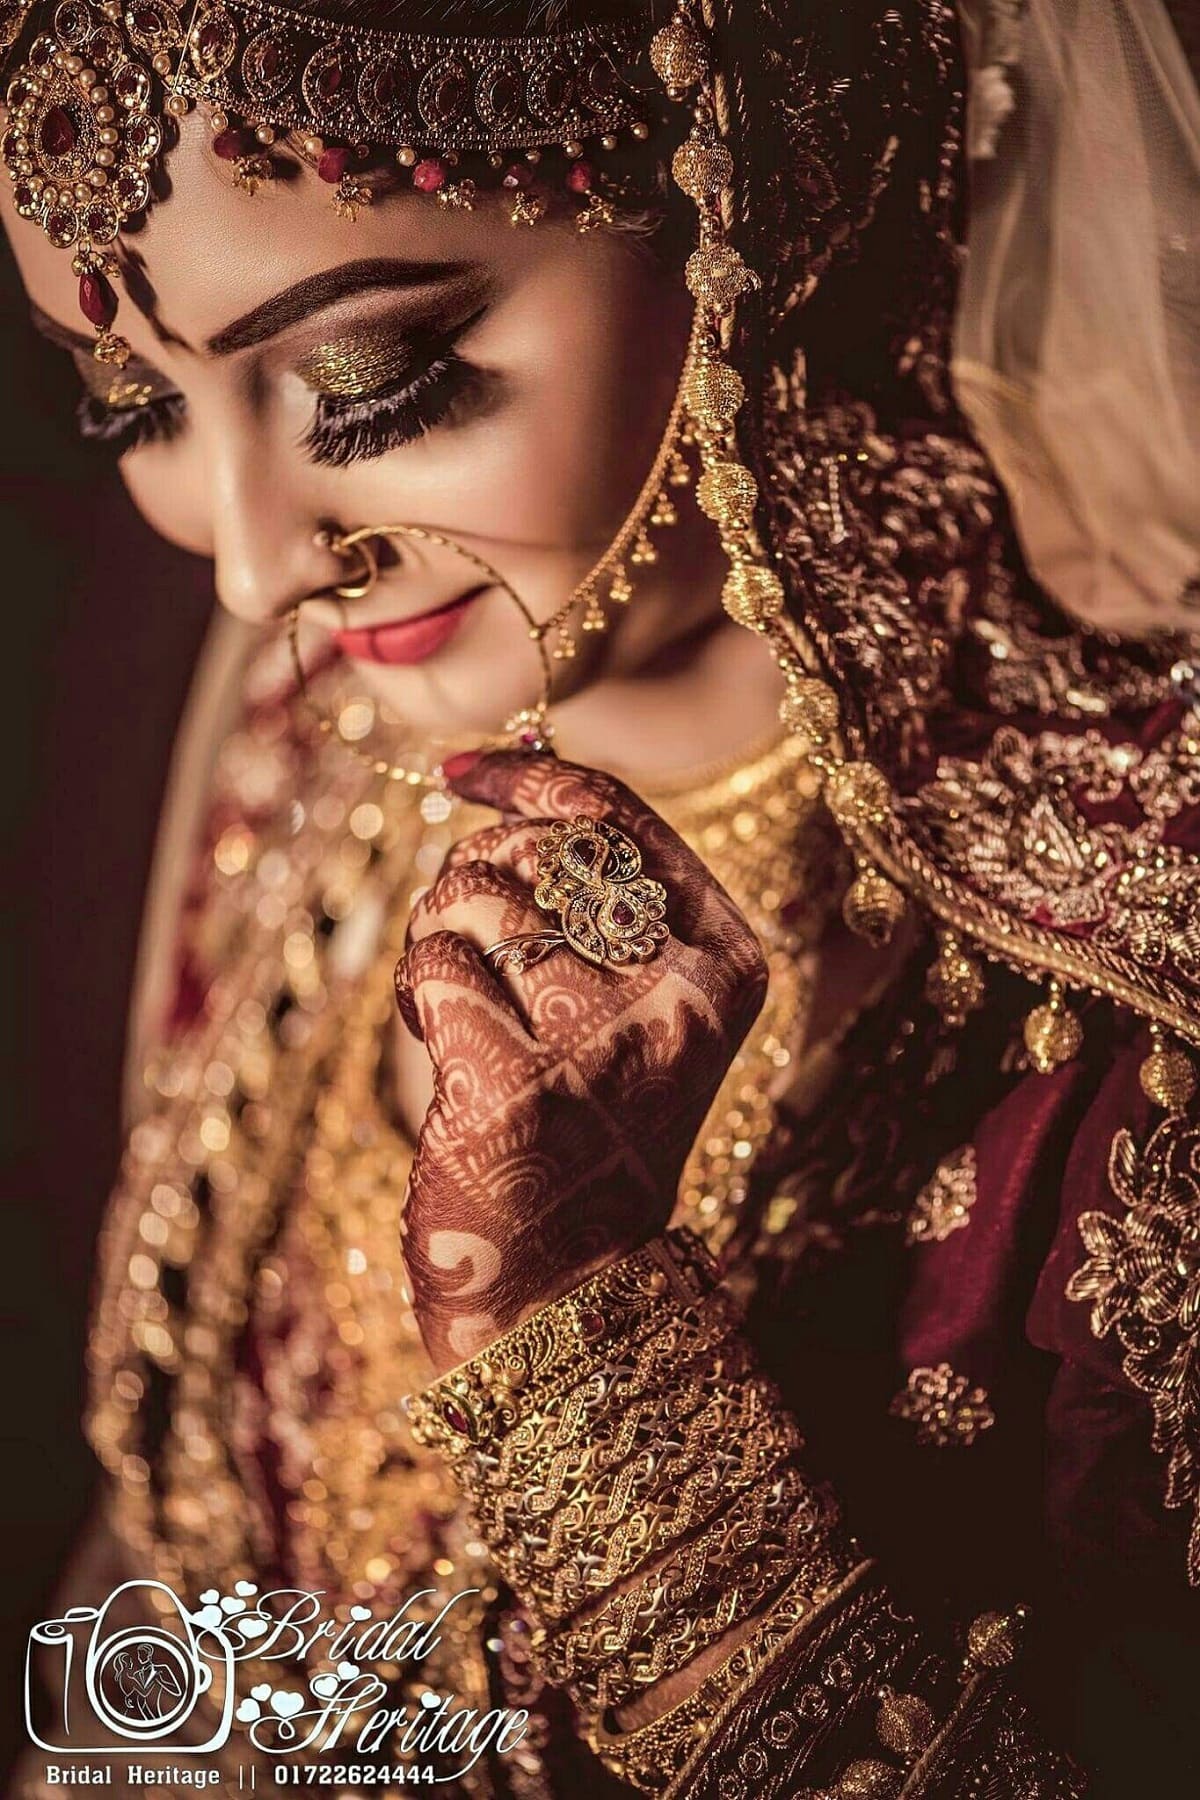 Gorgeous Bridal Look | Indian bride photography poses, Bridal photography  poses, Indian wedding photography poses